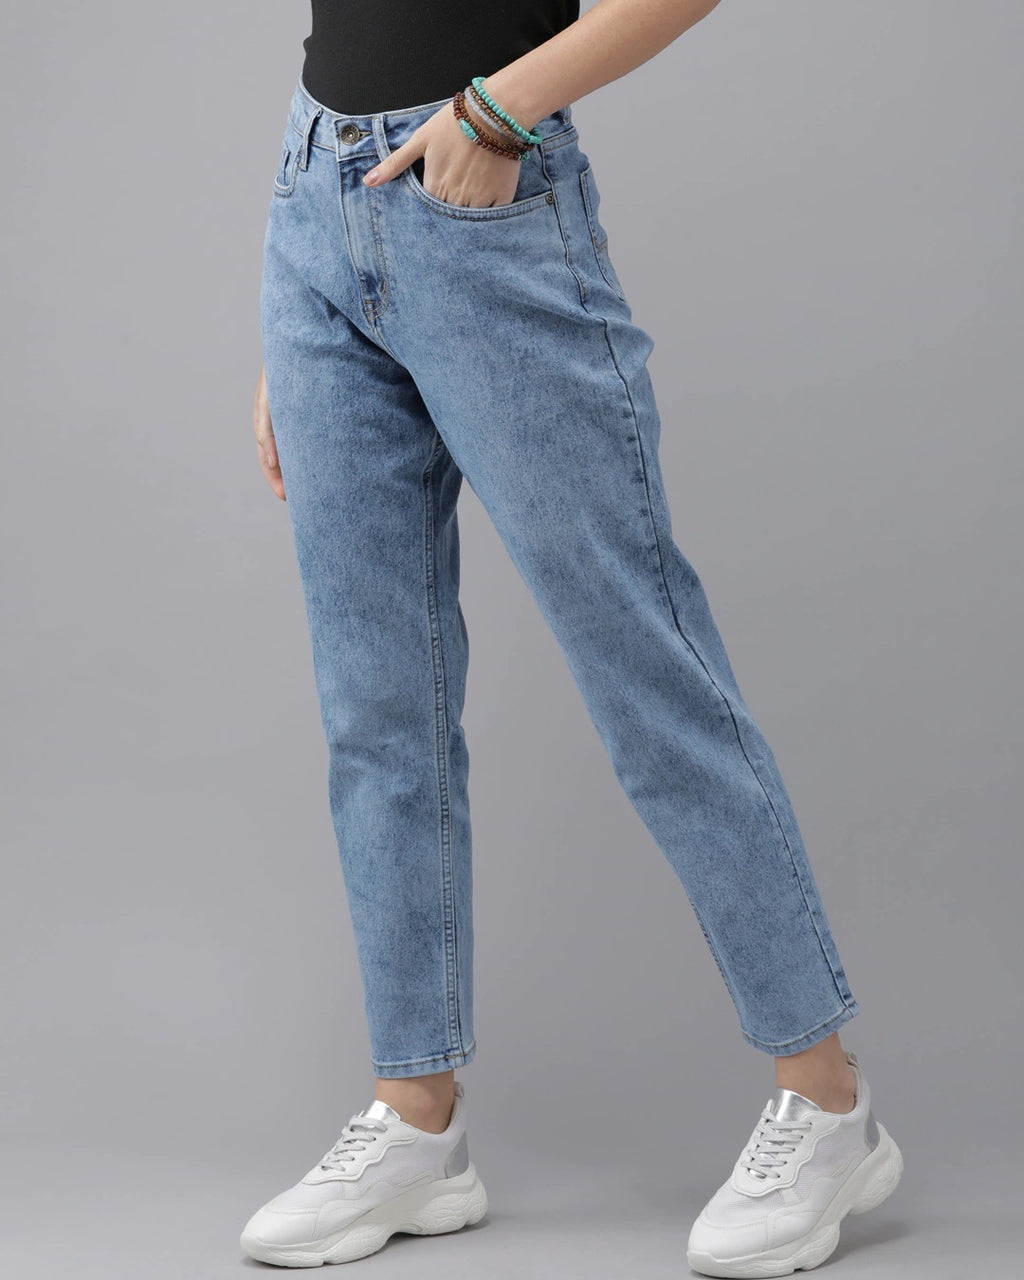 Jeans & Pants | Roadster Jeans | Freeup